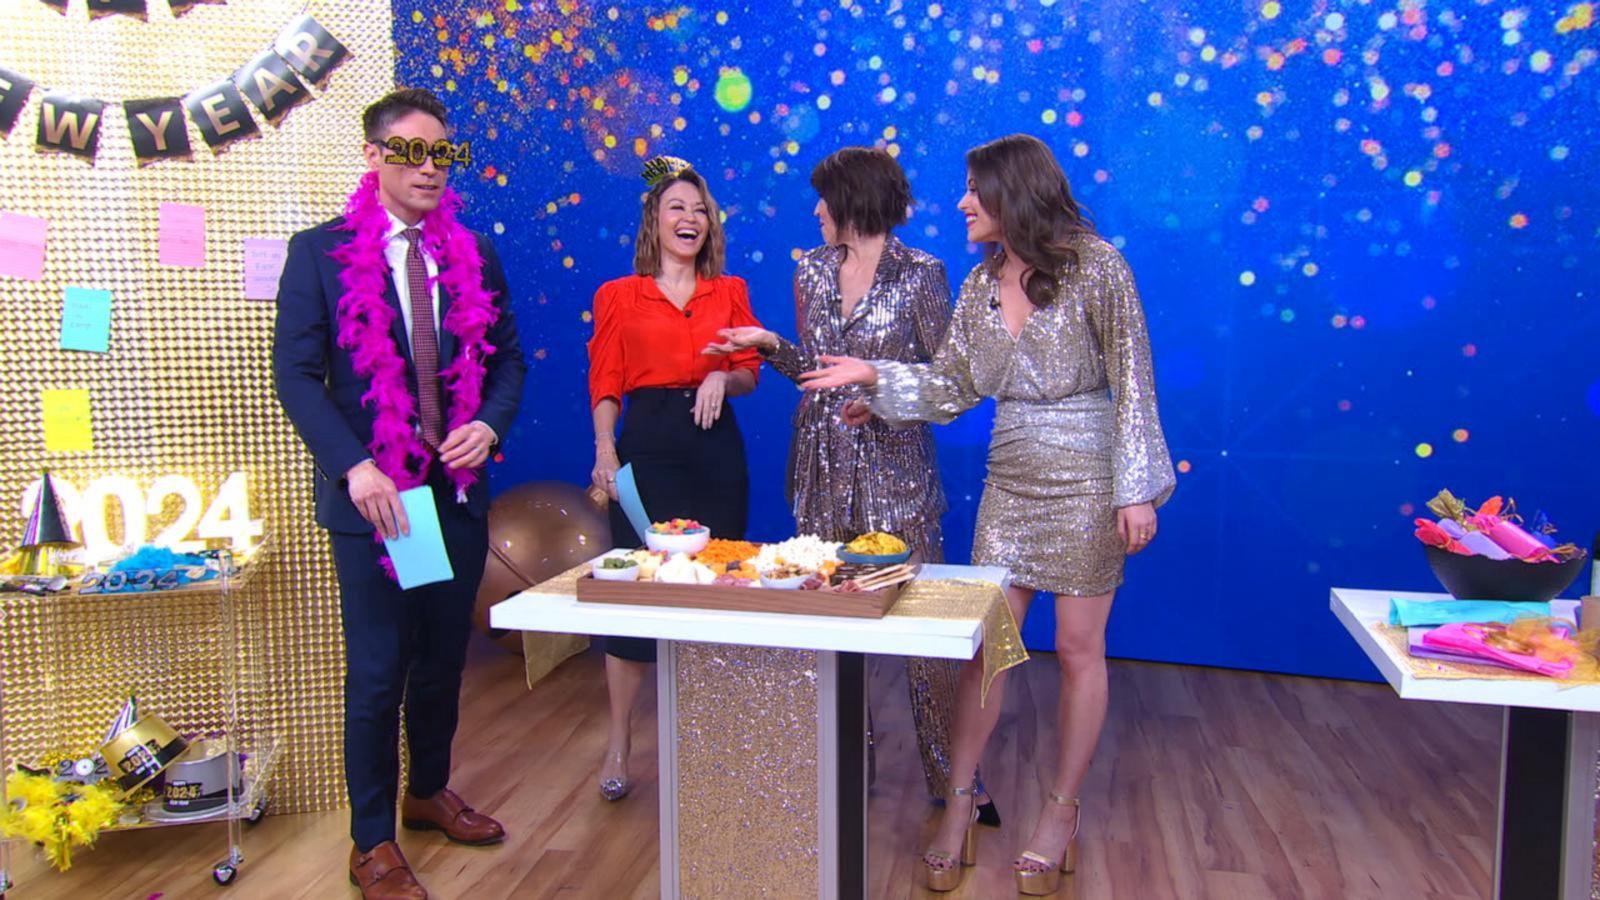 VIDEO: Tips for last-minute New Year’s Eve party planning